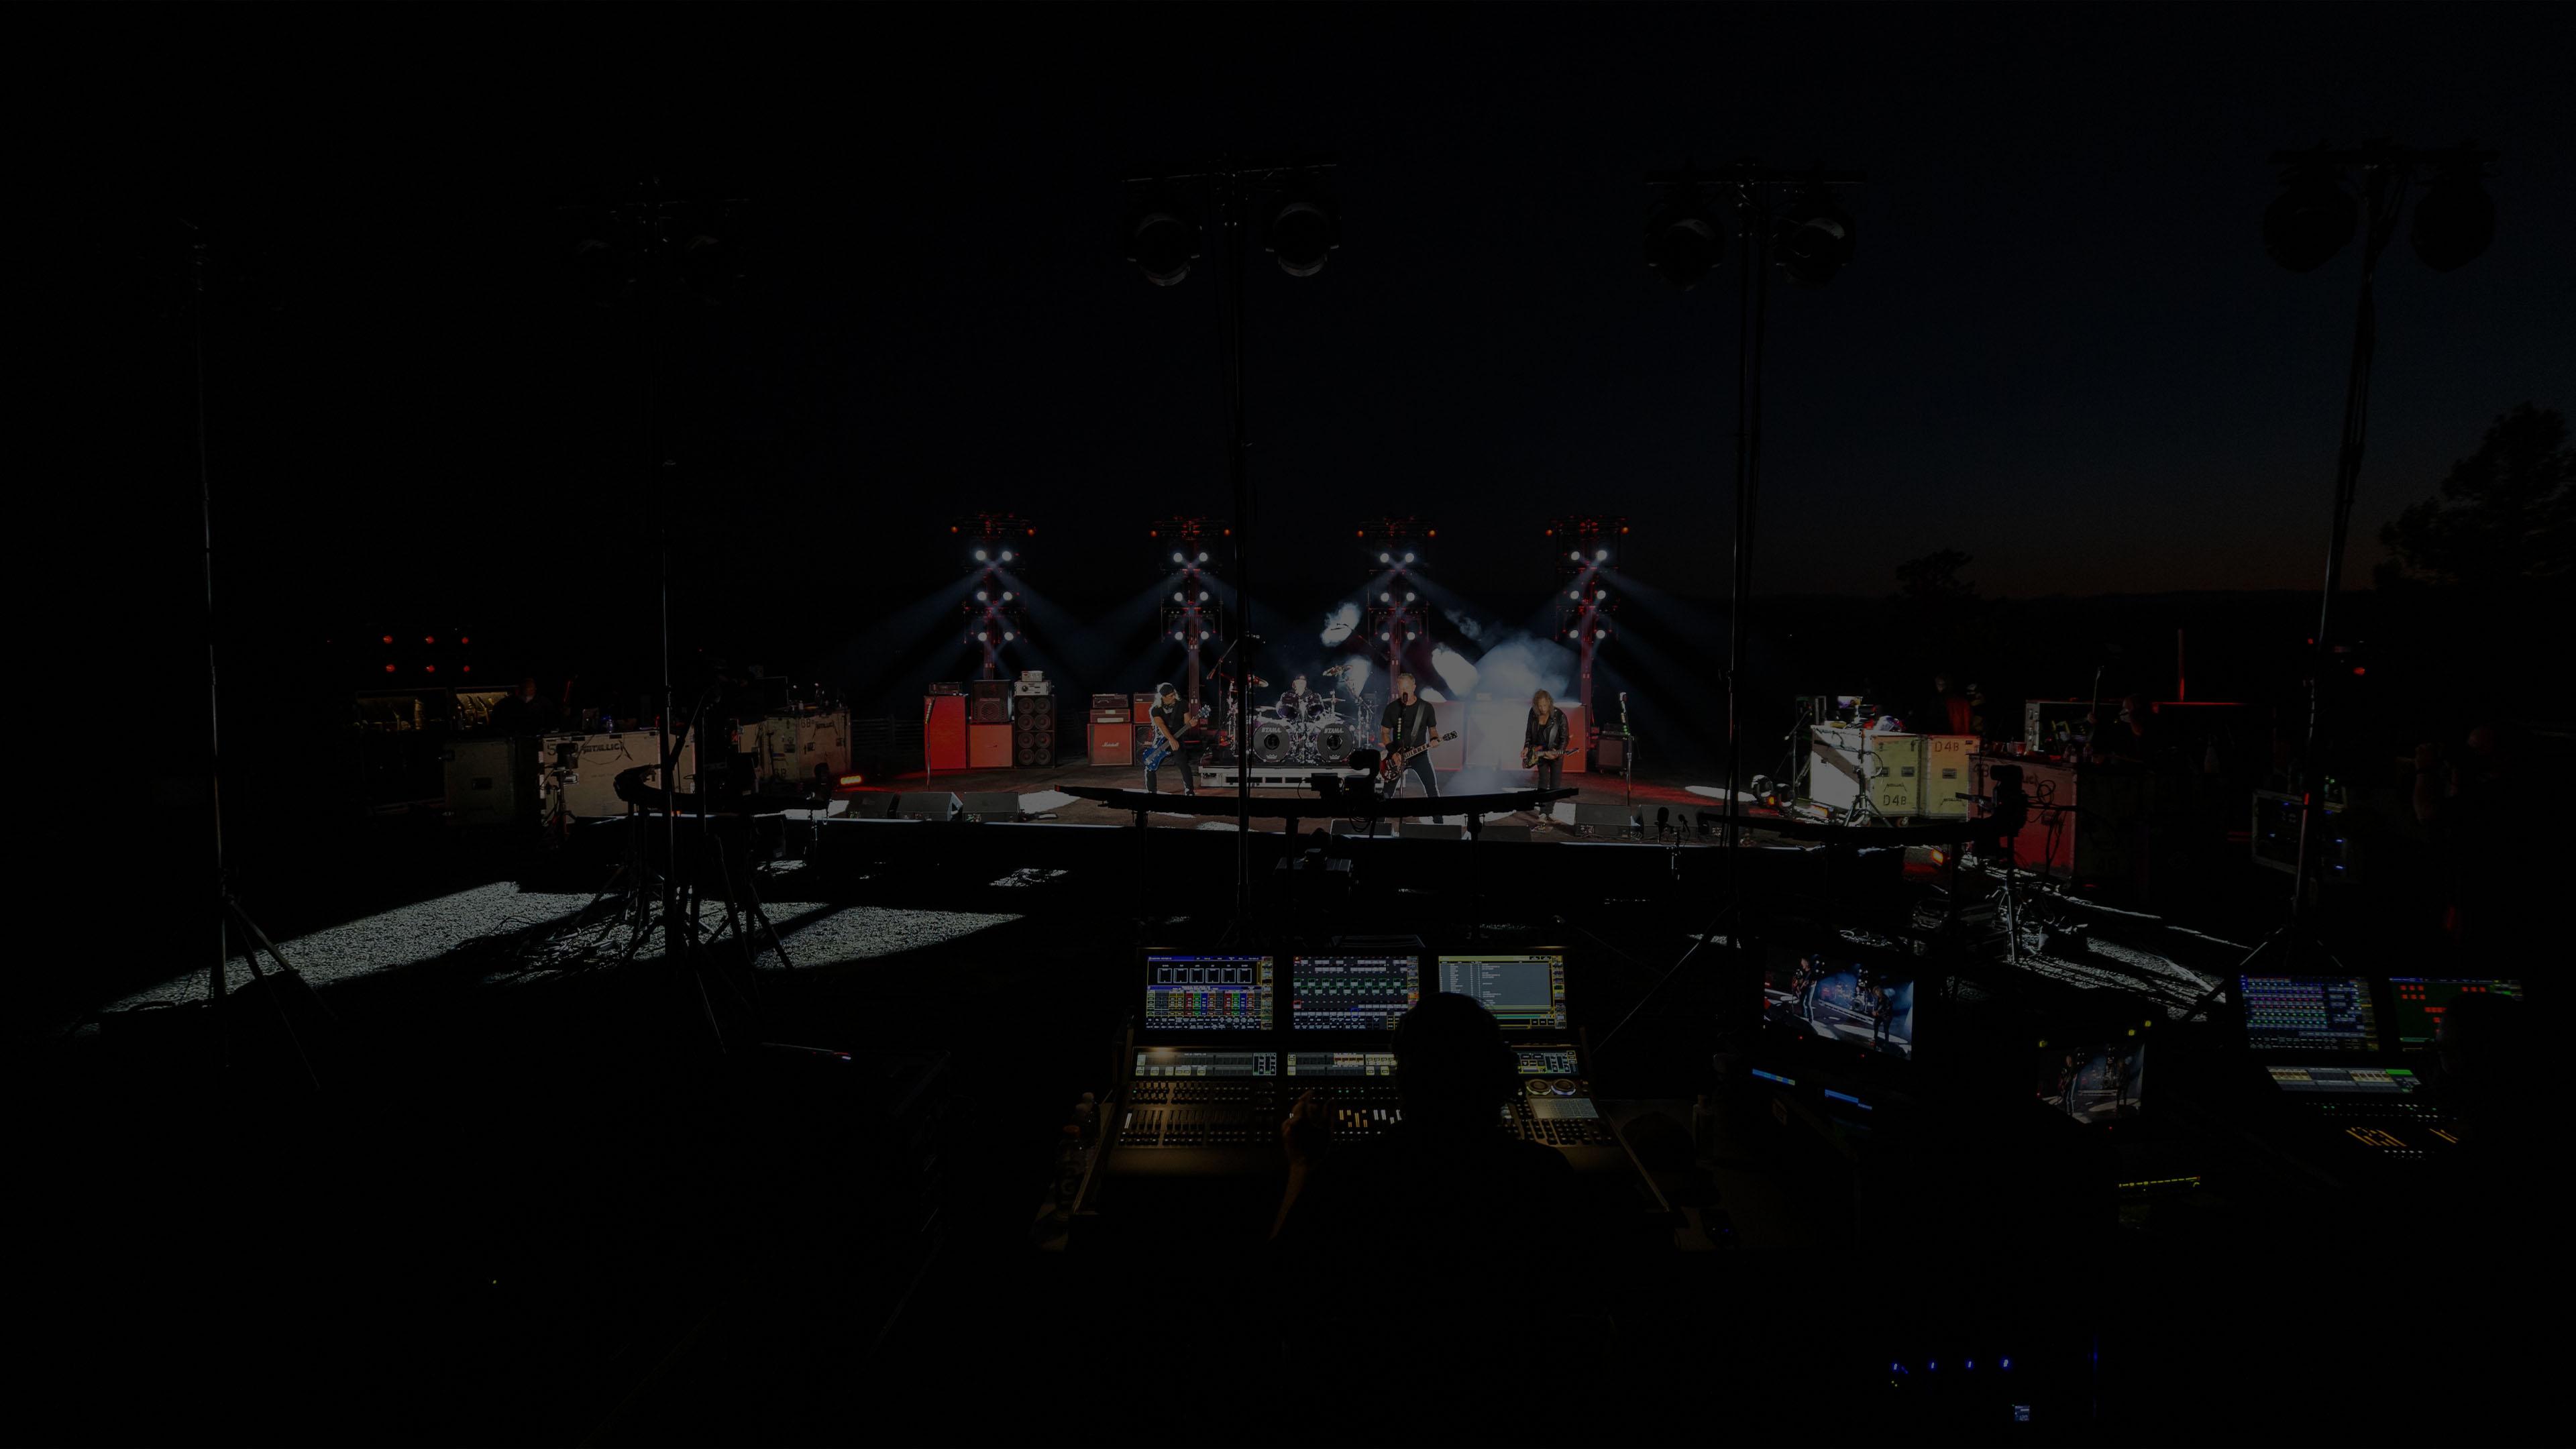 Banner Image for the photo gallery from the gig in Sonoma, CA shot on August 10, 2020